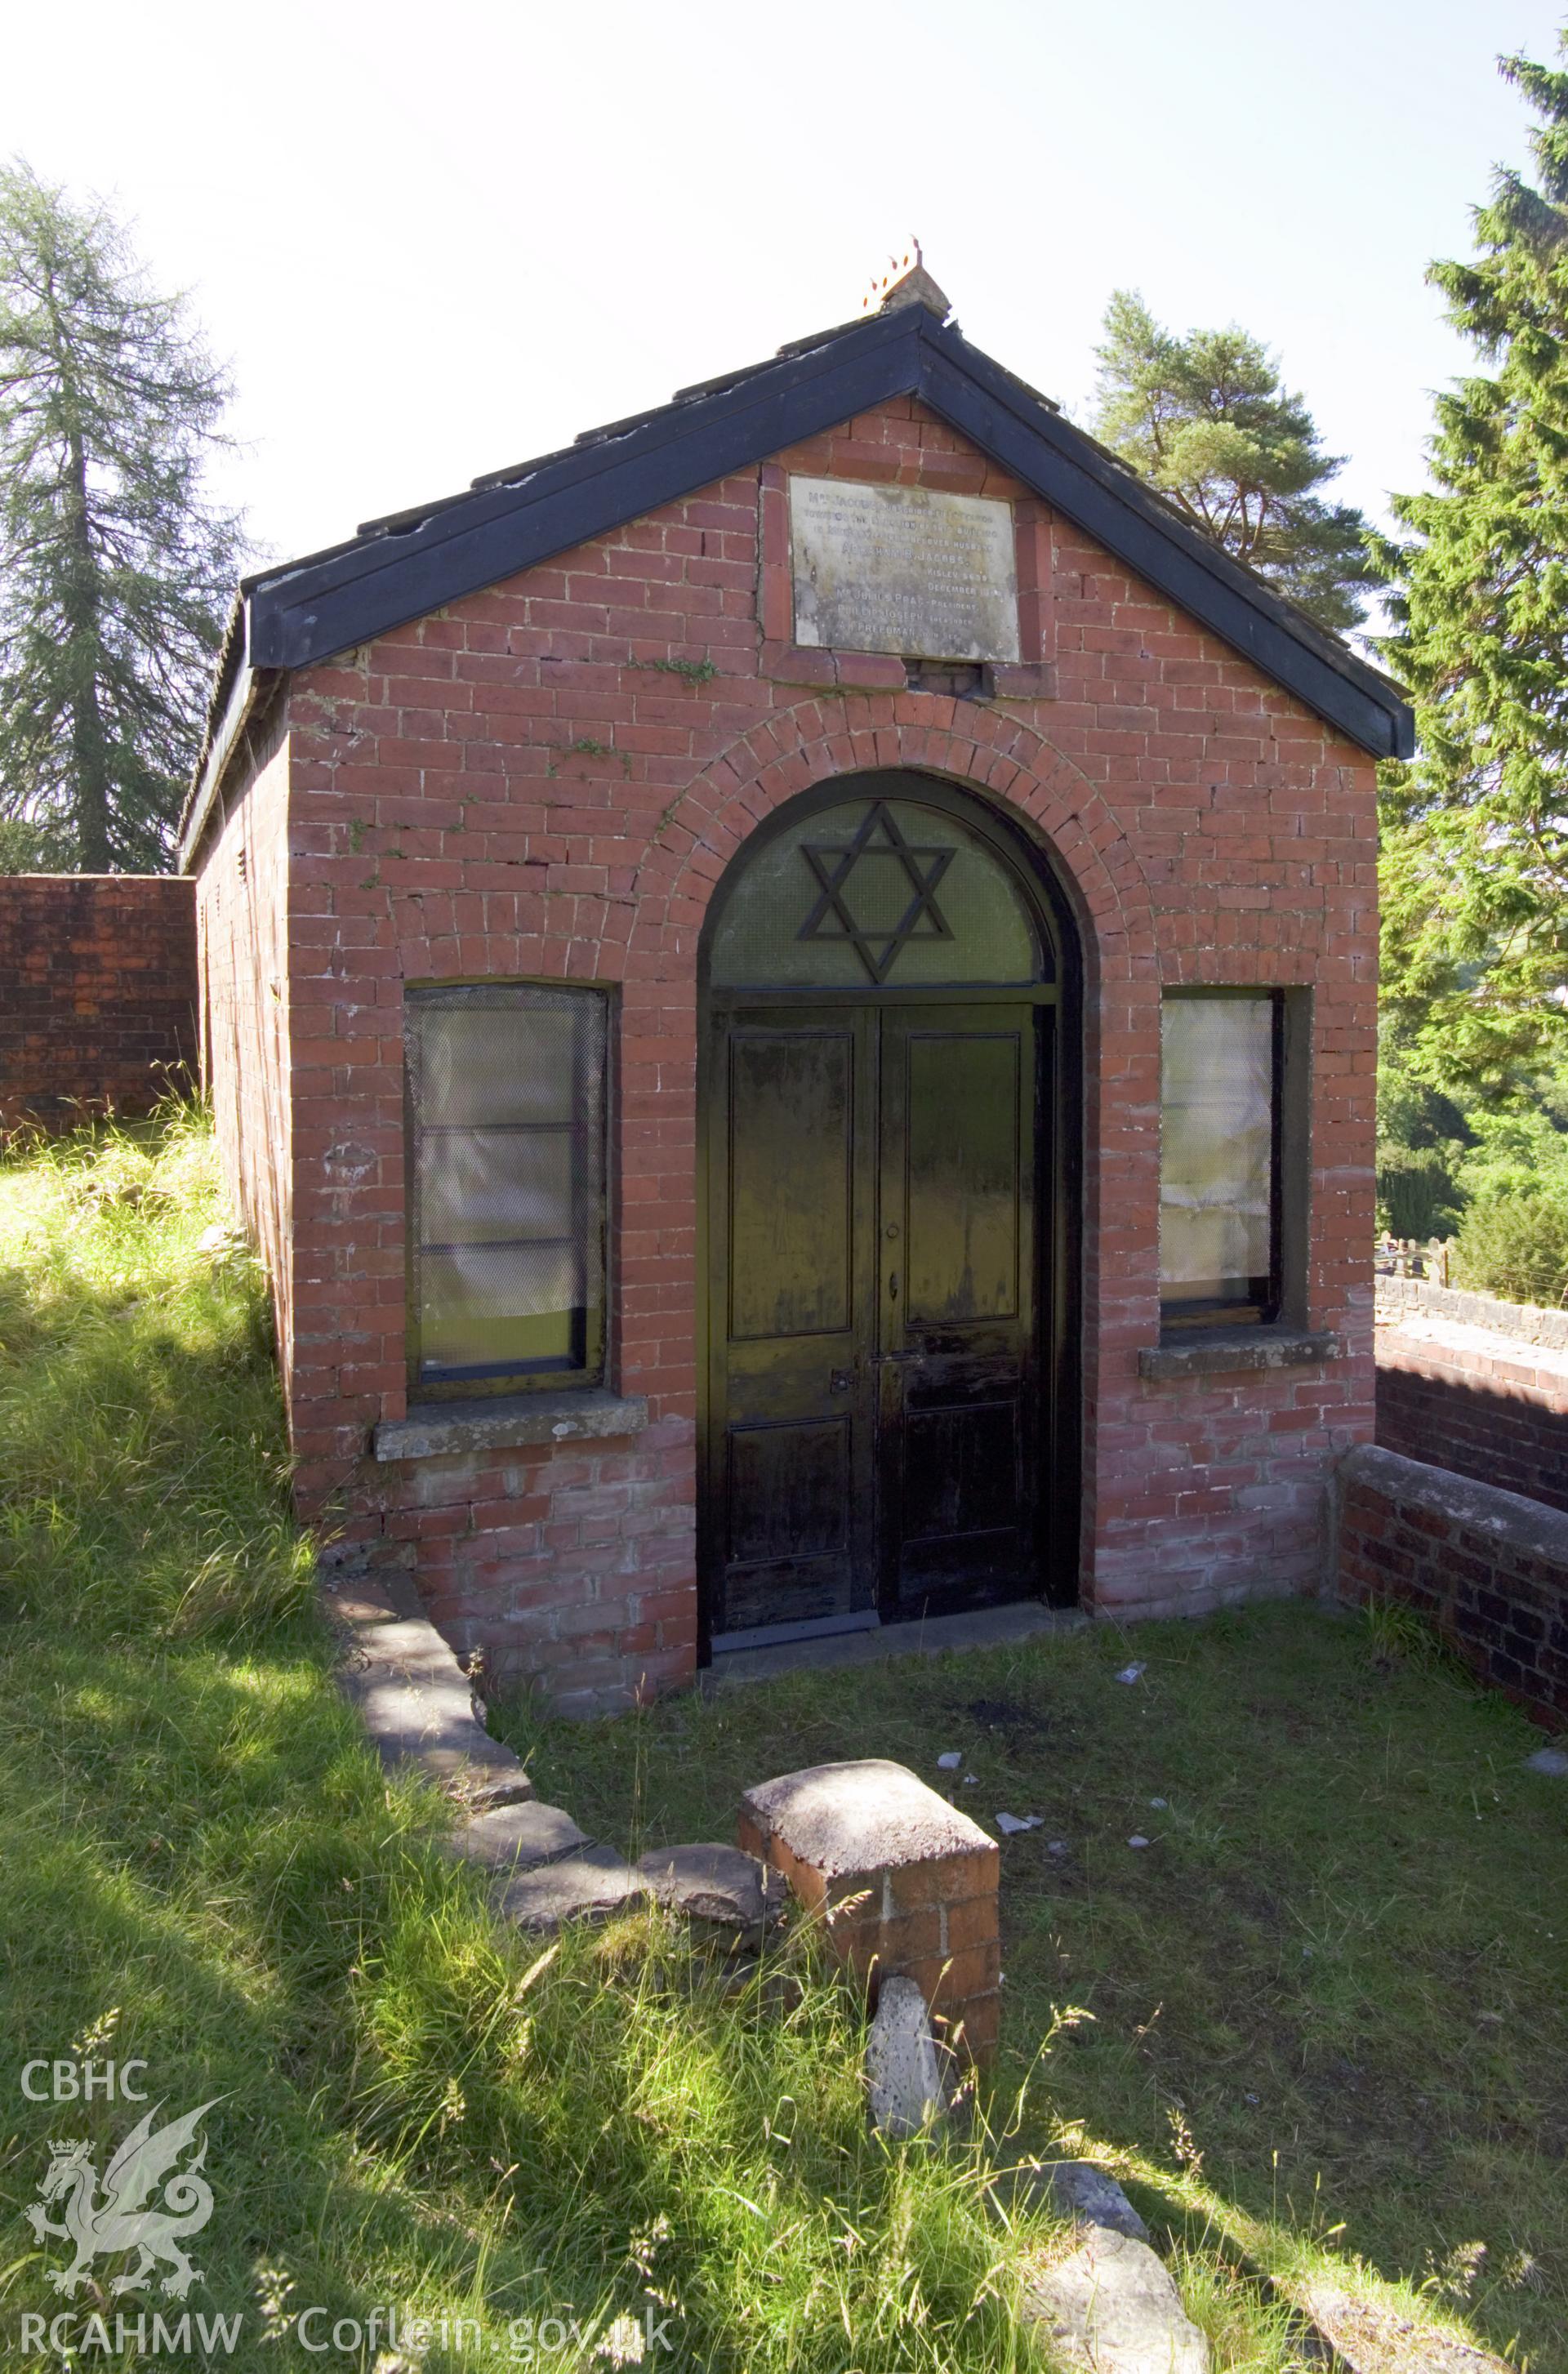 Prayer house at the Jewish burial ground at Cefn-coed-y-cymmer which was established in the 1860s. It served the Jewish population in the locality of Merthyr where the mining and iron industries employed Russian, Romanian and Polish refugees.